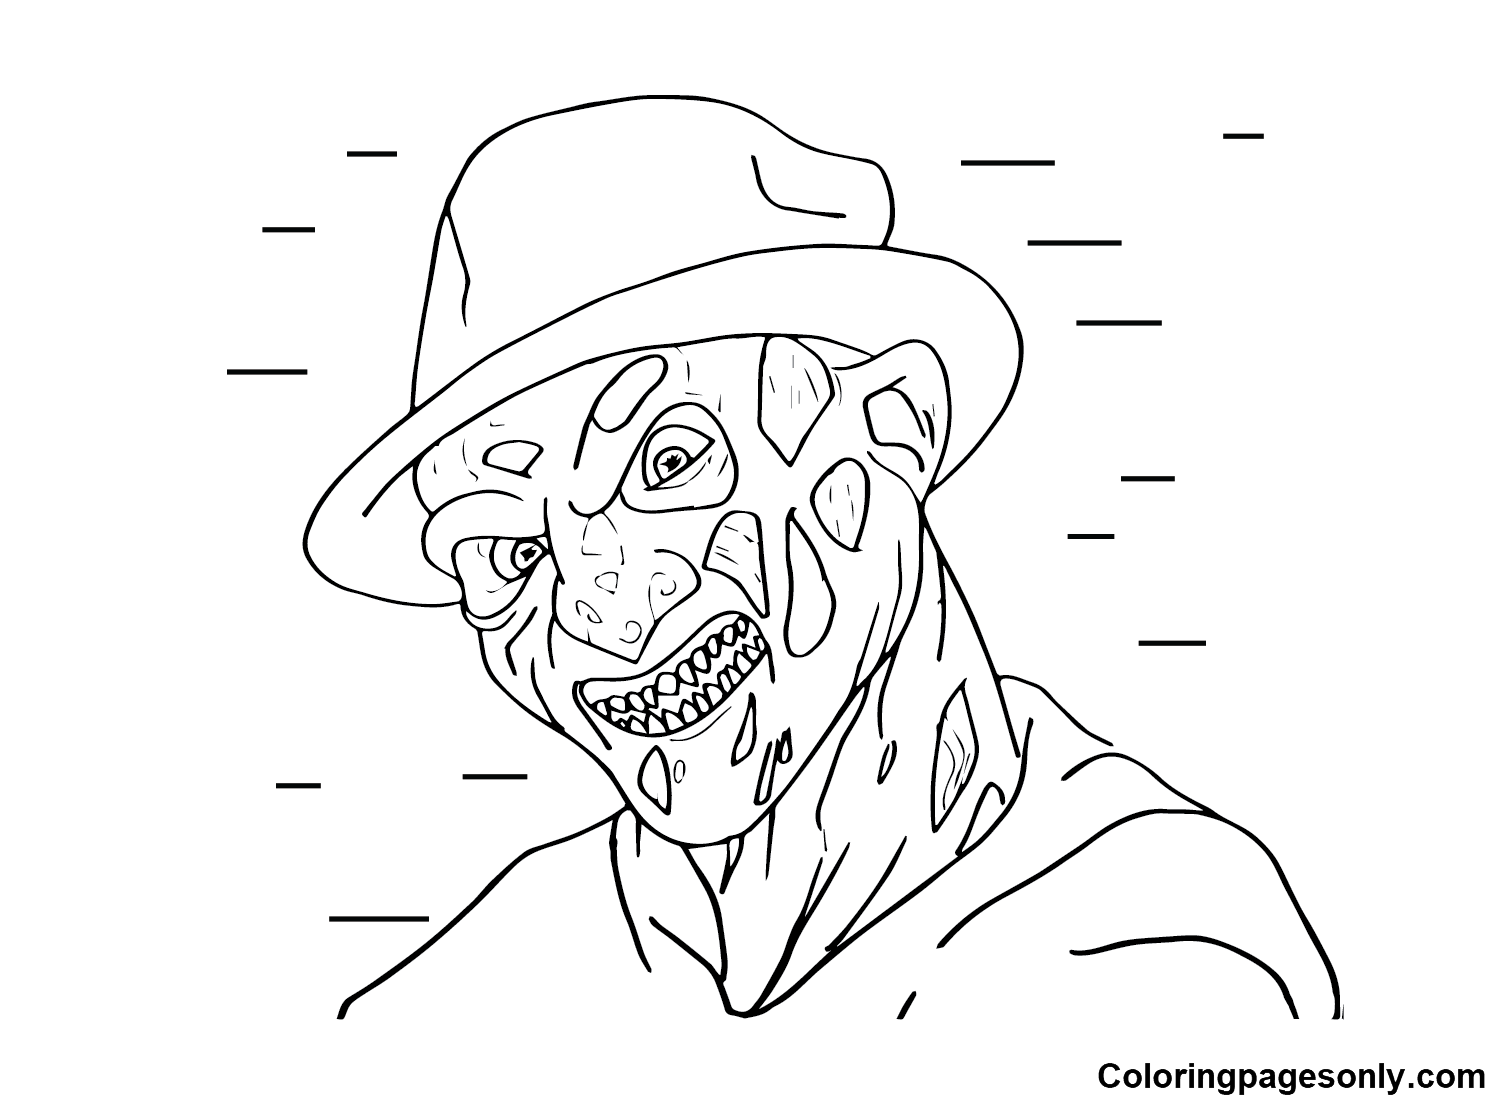 Freddy krueger drawing coloring page